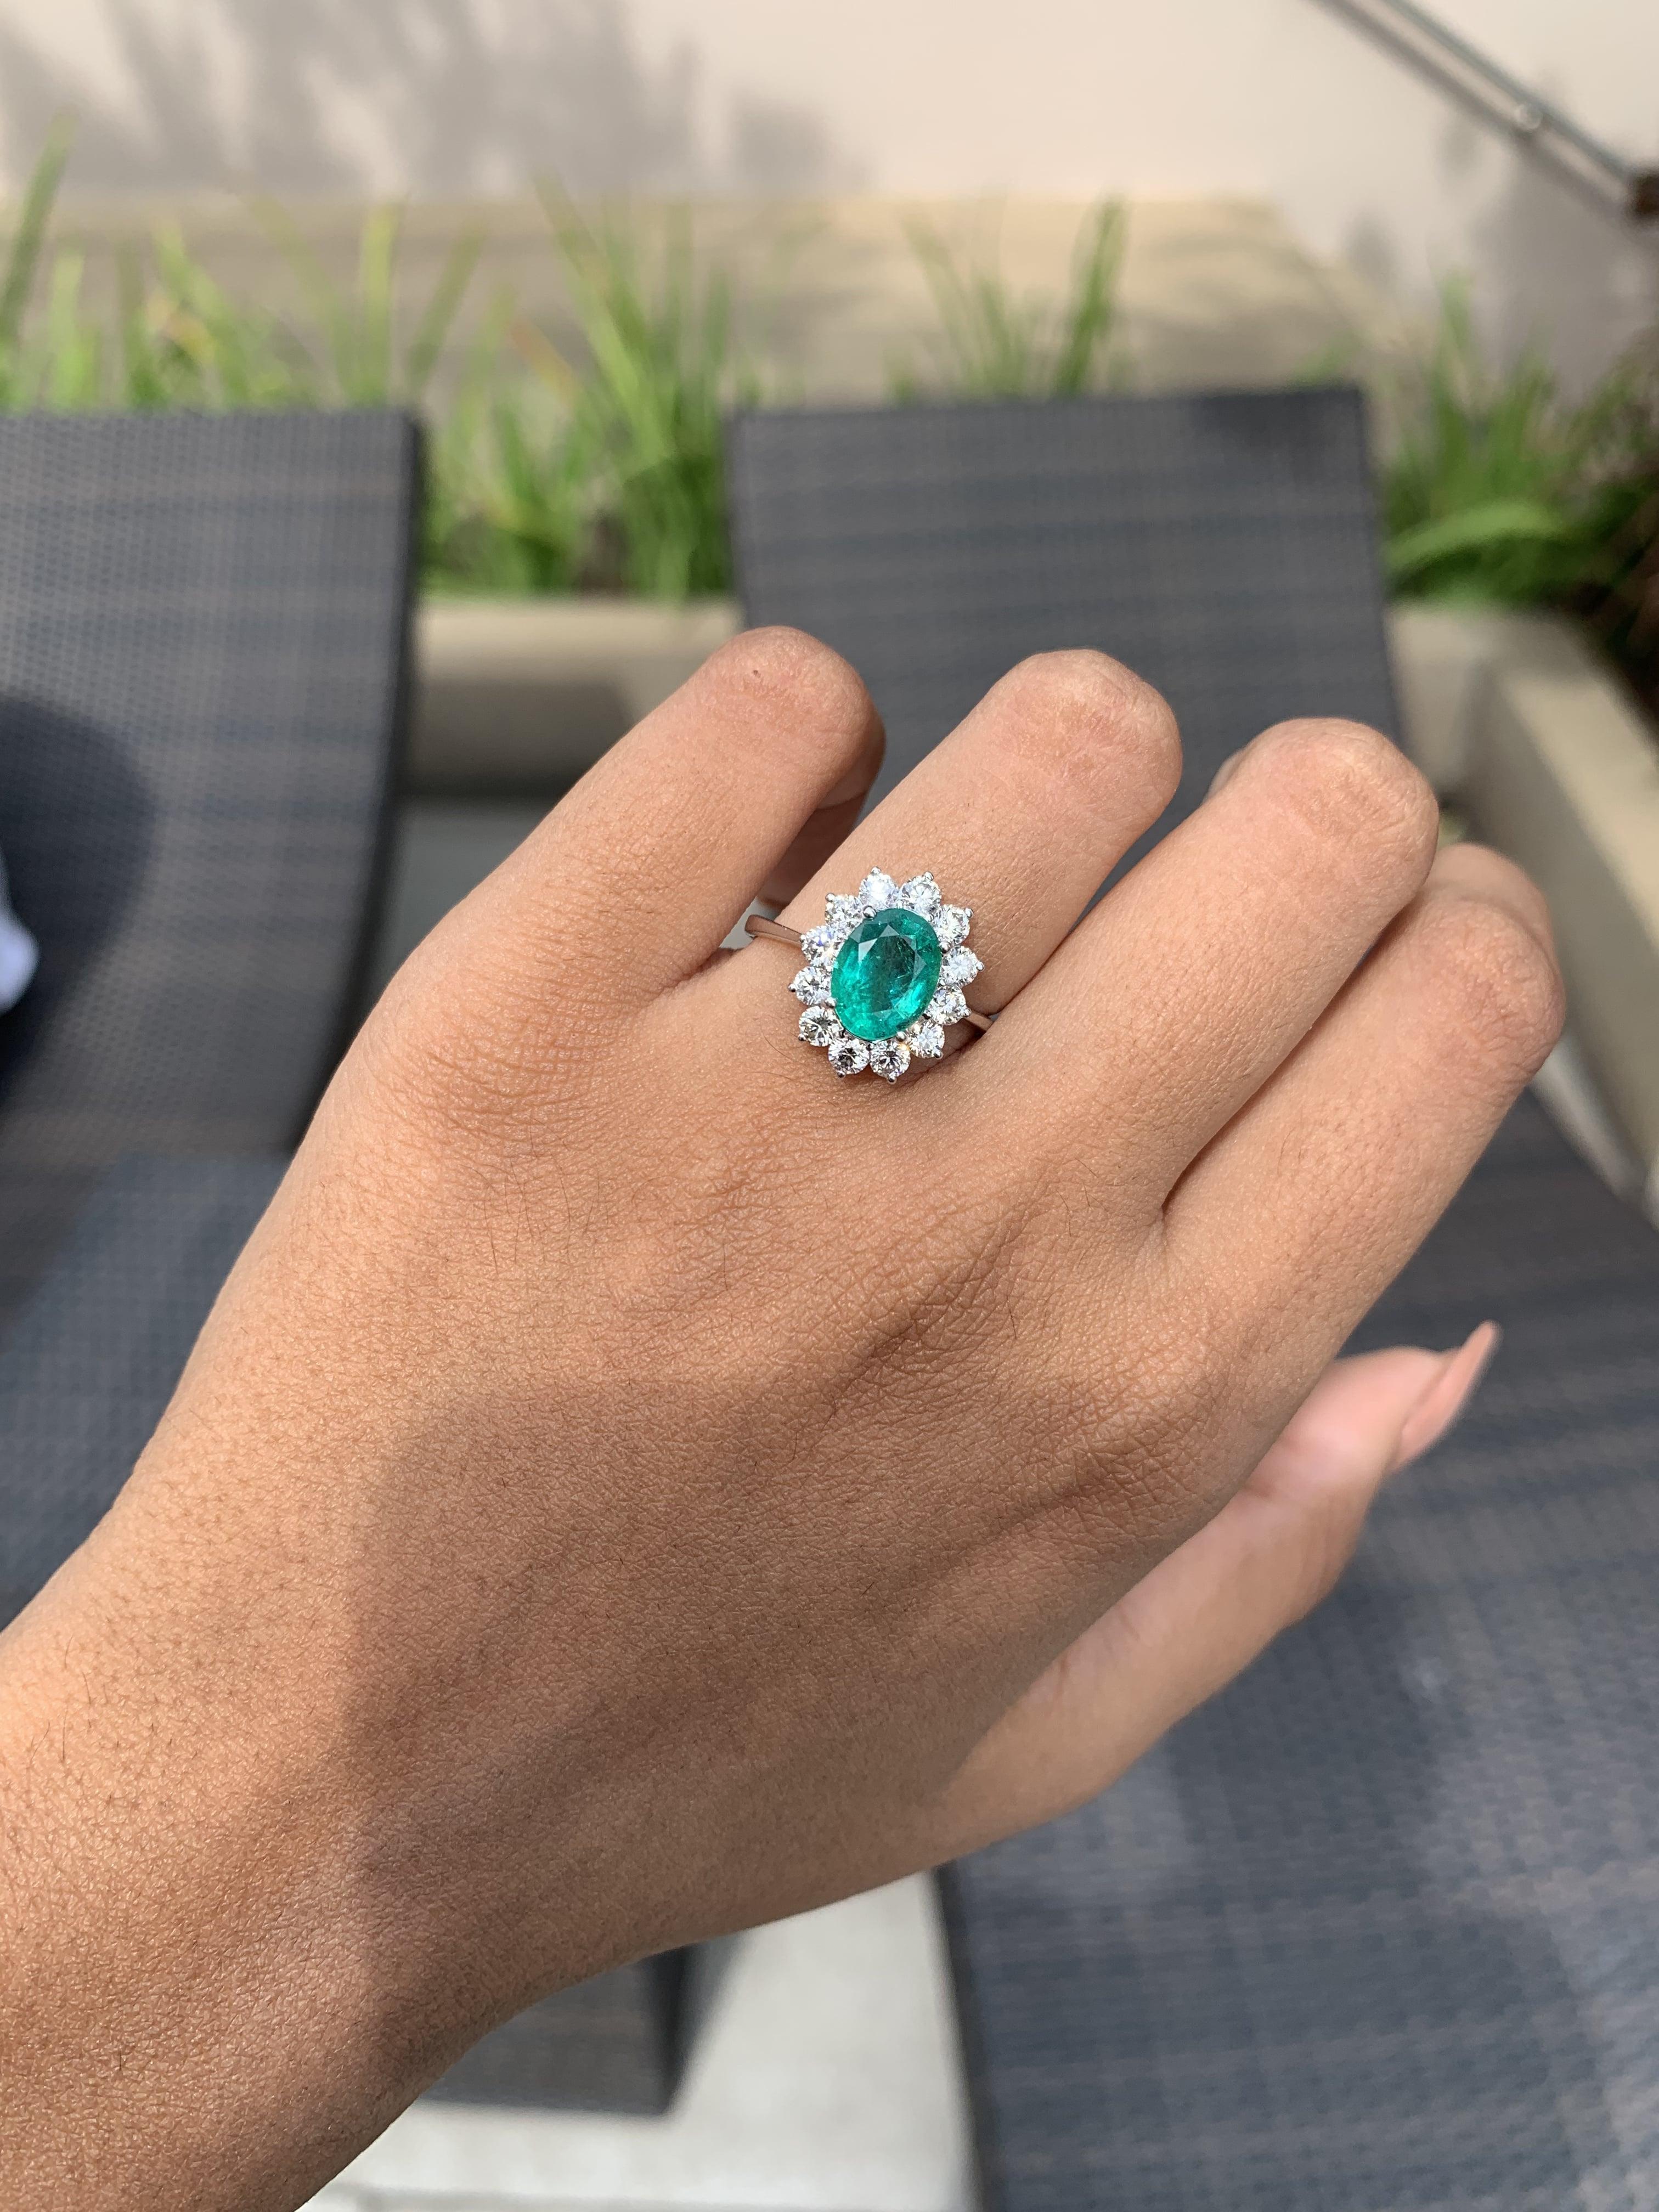 Presenting this dainty ring that perfectly combines the vivid green elegance of a meticulously cut emerald with the brilliance of sparkling round Diamonds.

Originating from the enchanting mines of Zambia, the 1.64 Carat Emerald boasts a striking